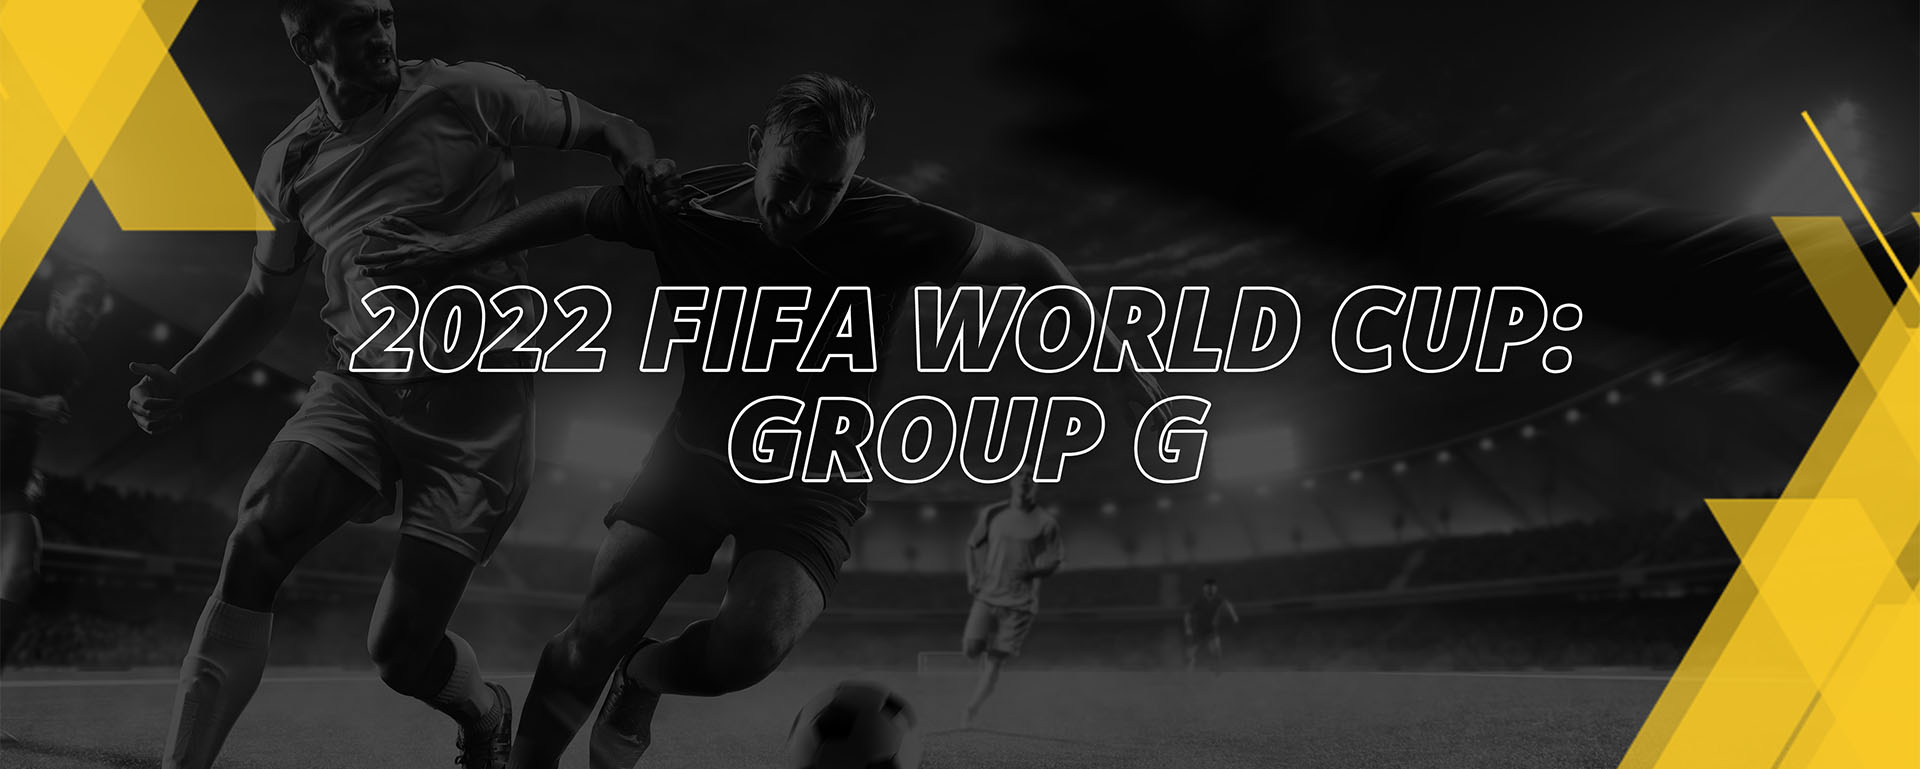 FIFA WORLD CUP 2022: GROUP G